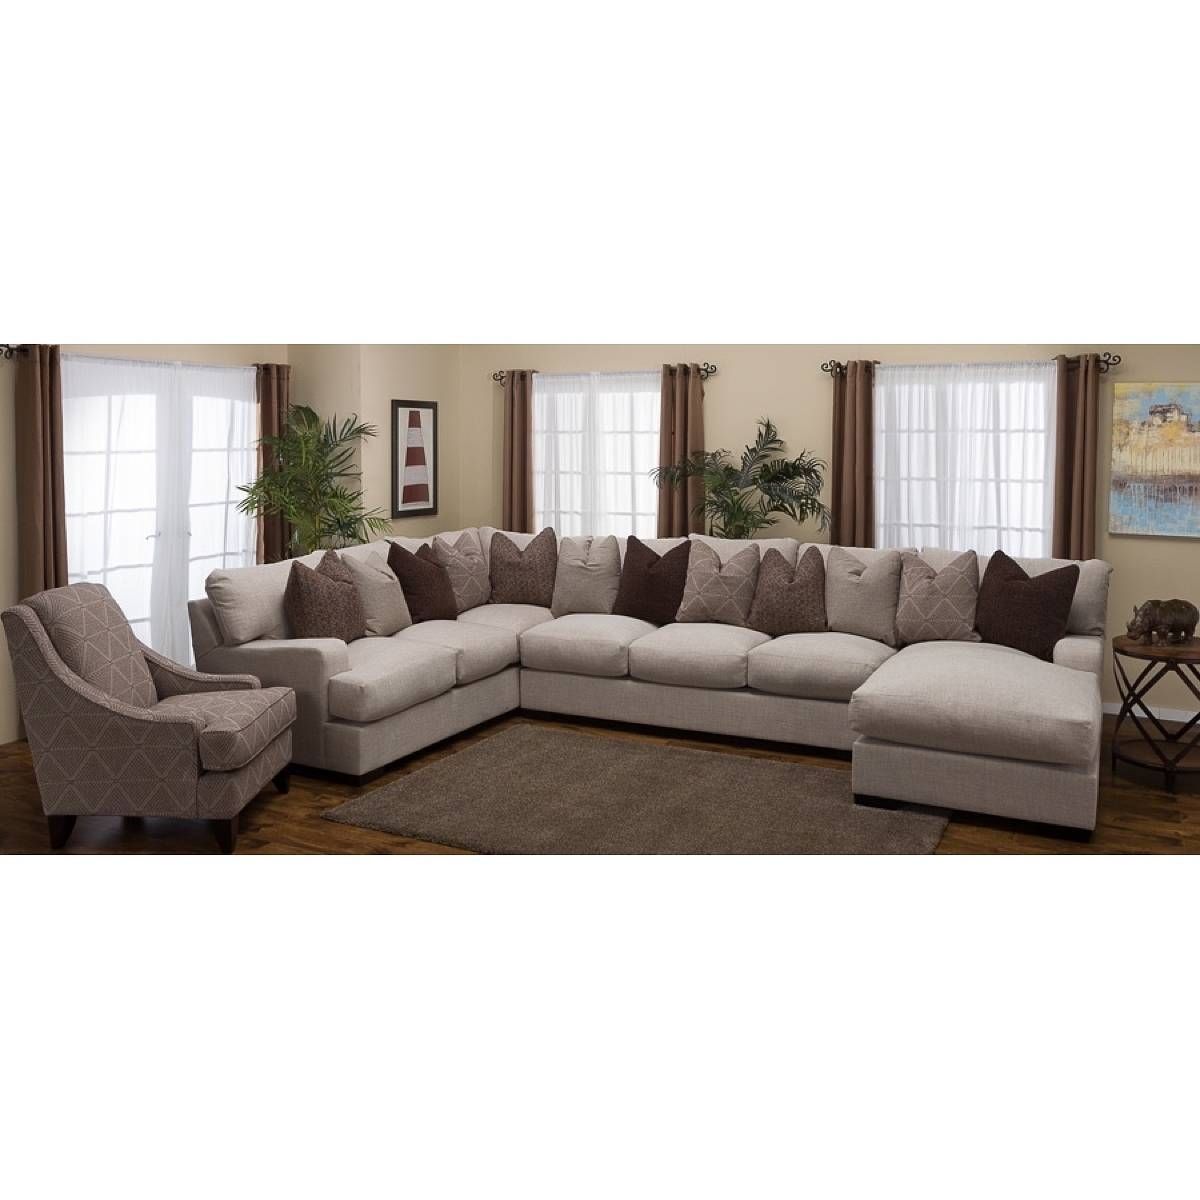 12 Collection Of Eco Friendly Sectional Sofa Intended For Eco Friendly Sectional Sofa (Photo 7 of 30)